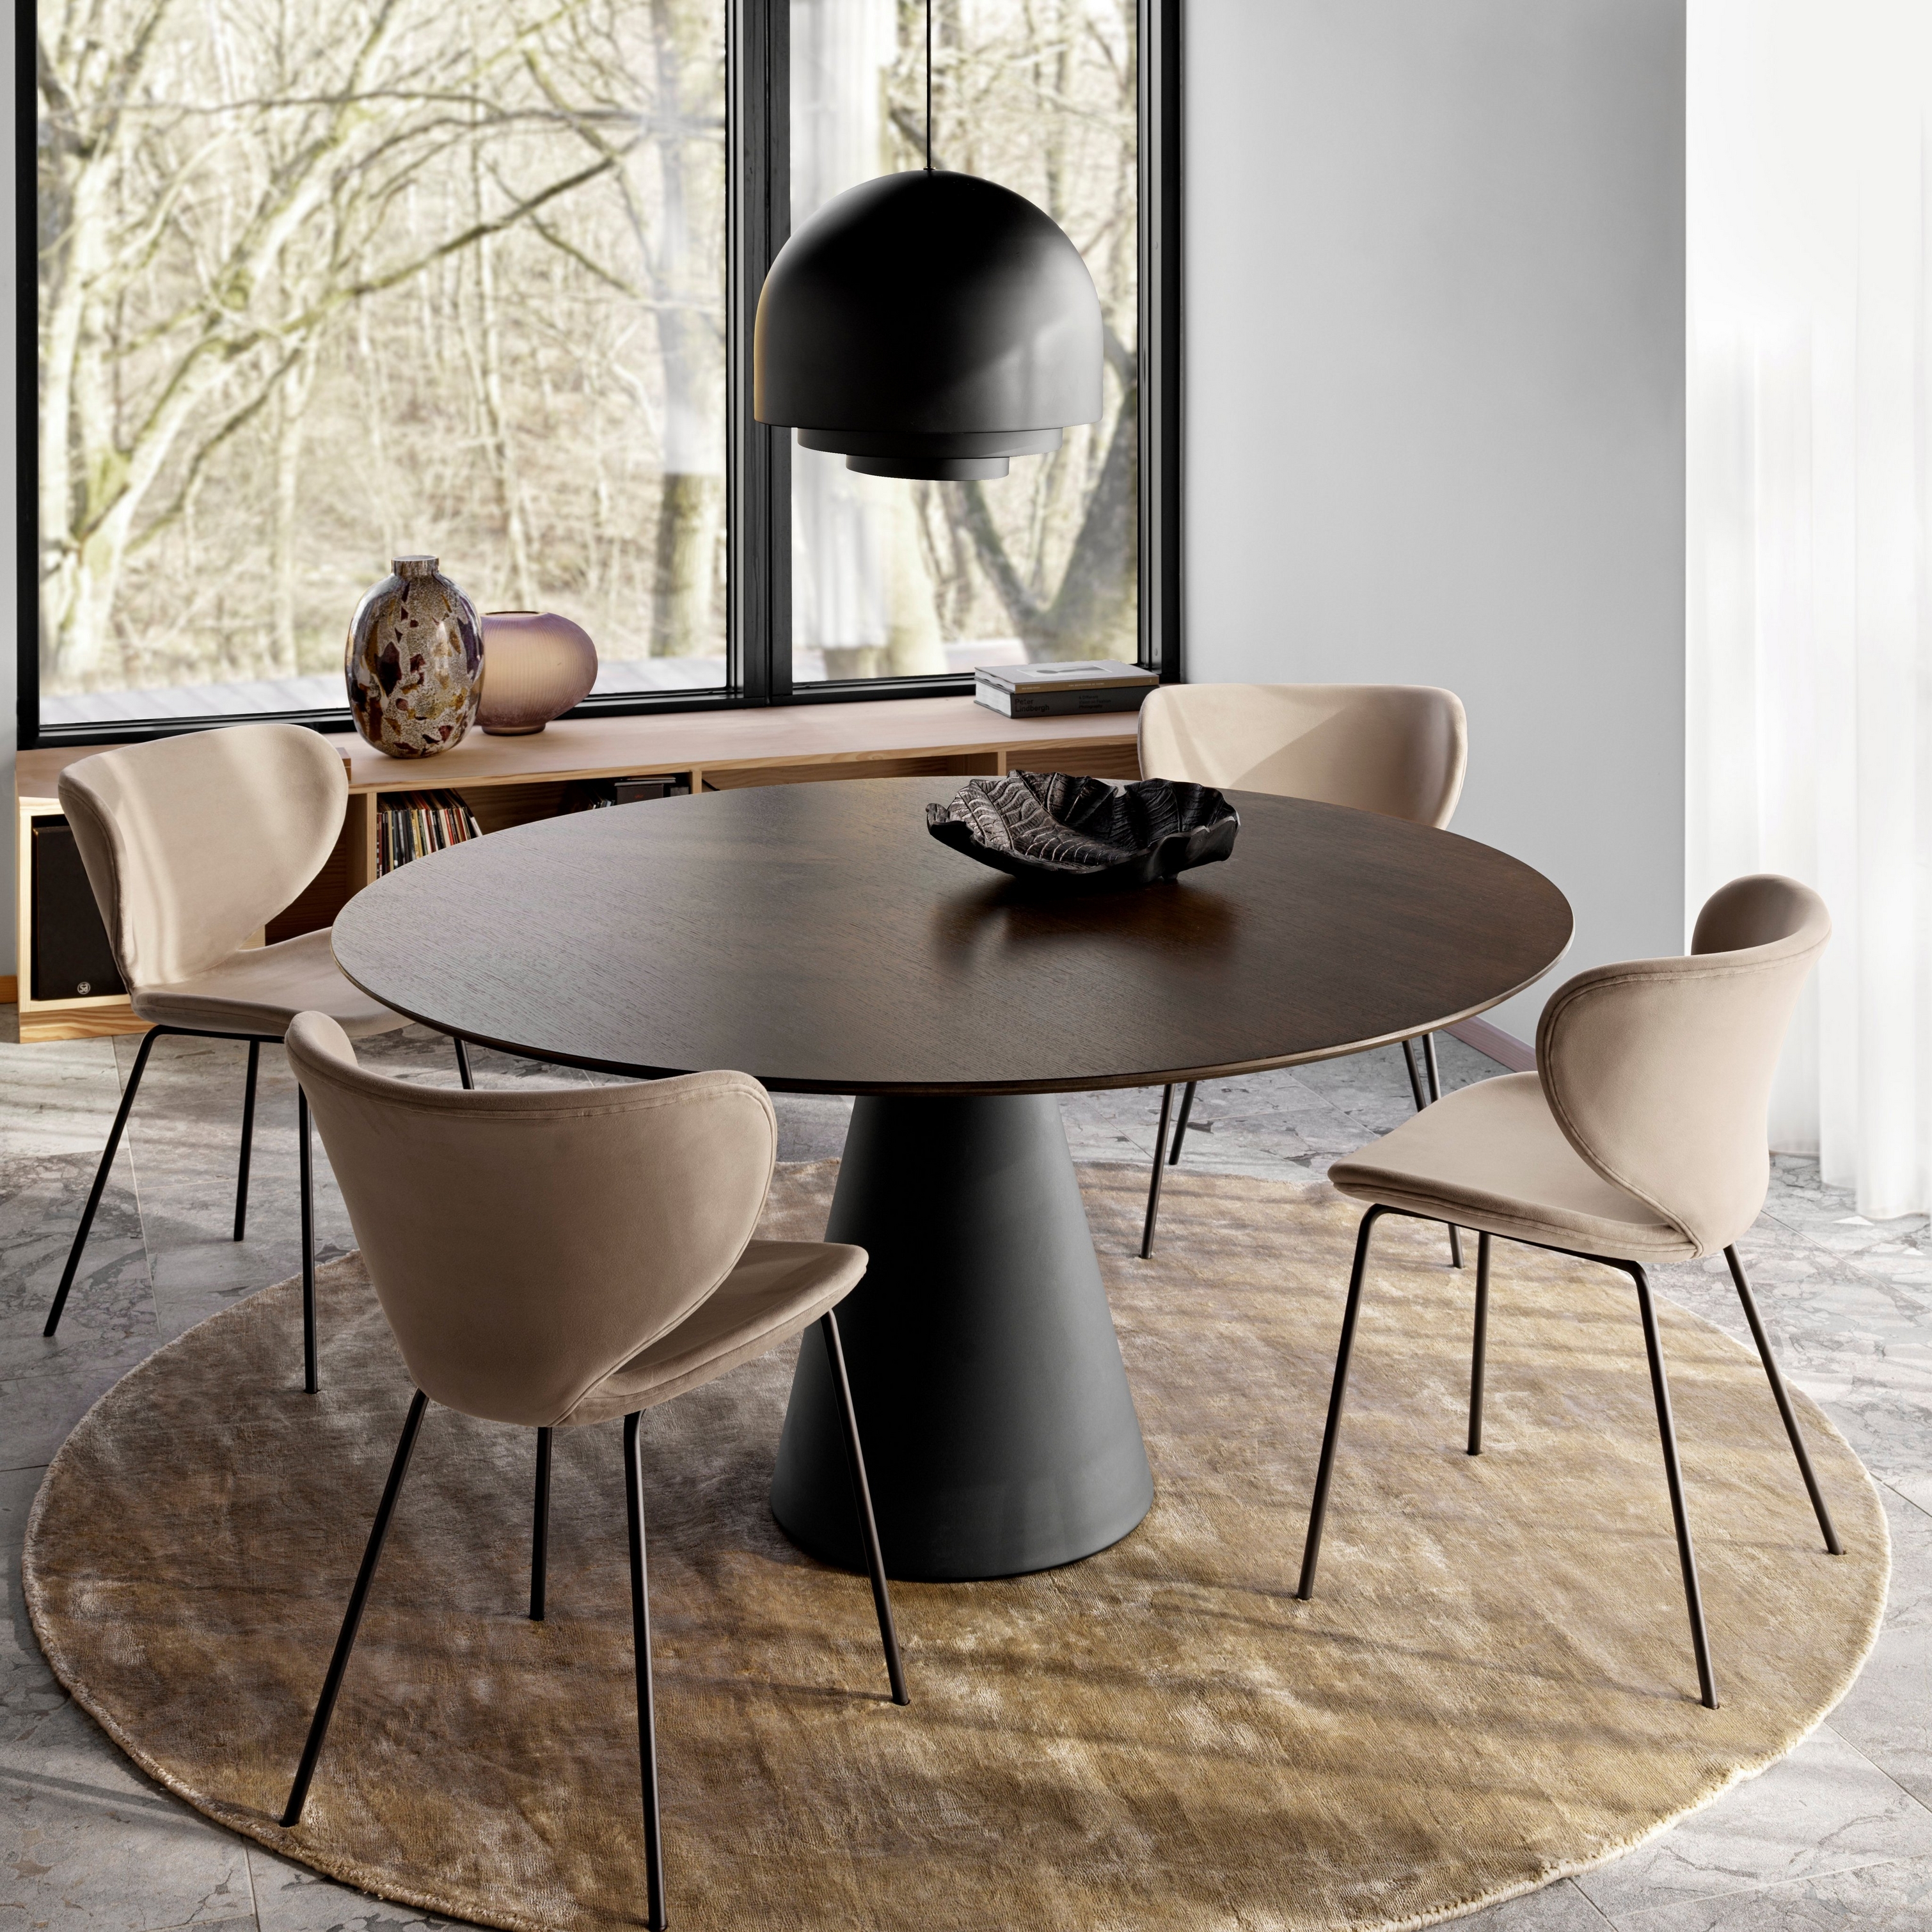 Round dining table with tan chairs, large pendant light, on a circular rug near floor-to-ceiling windows.